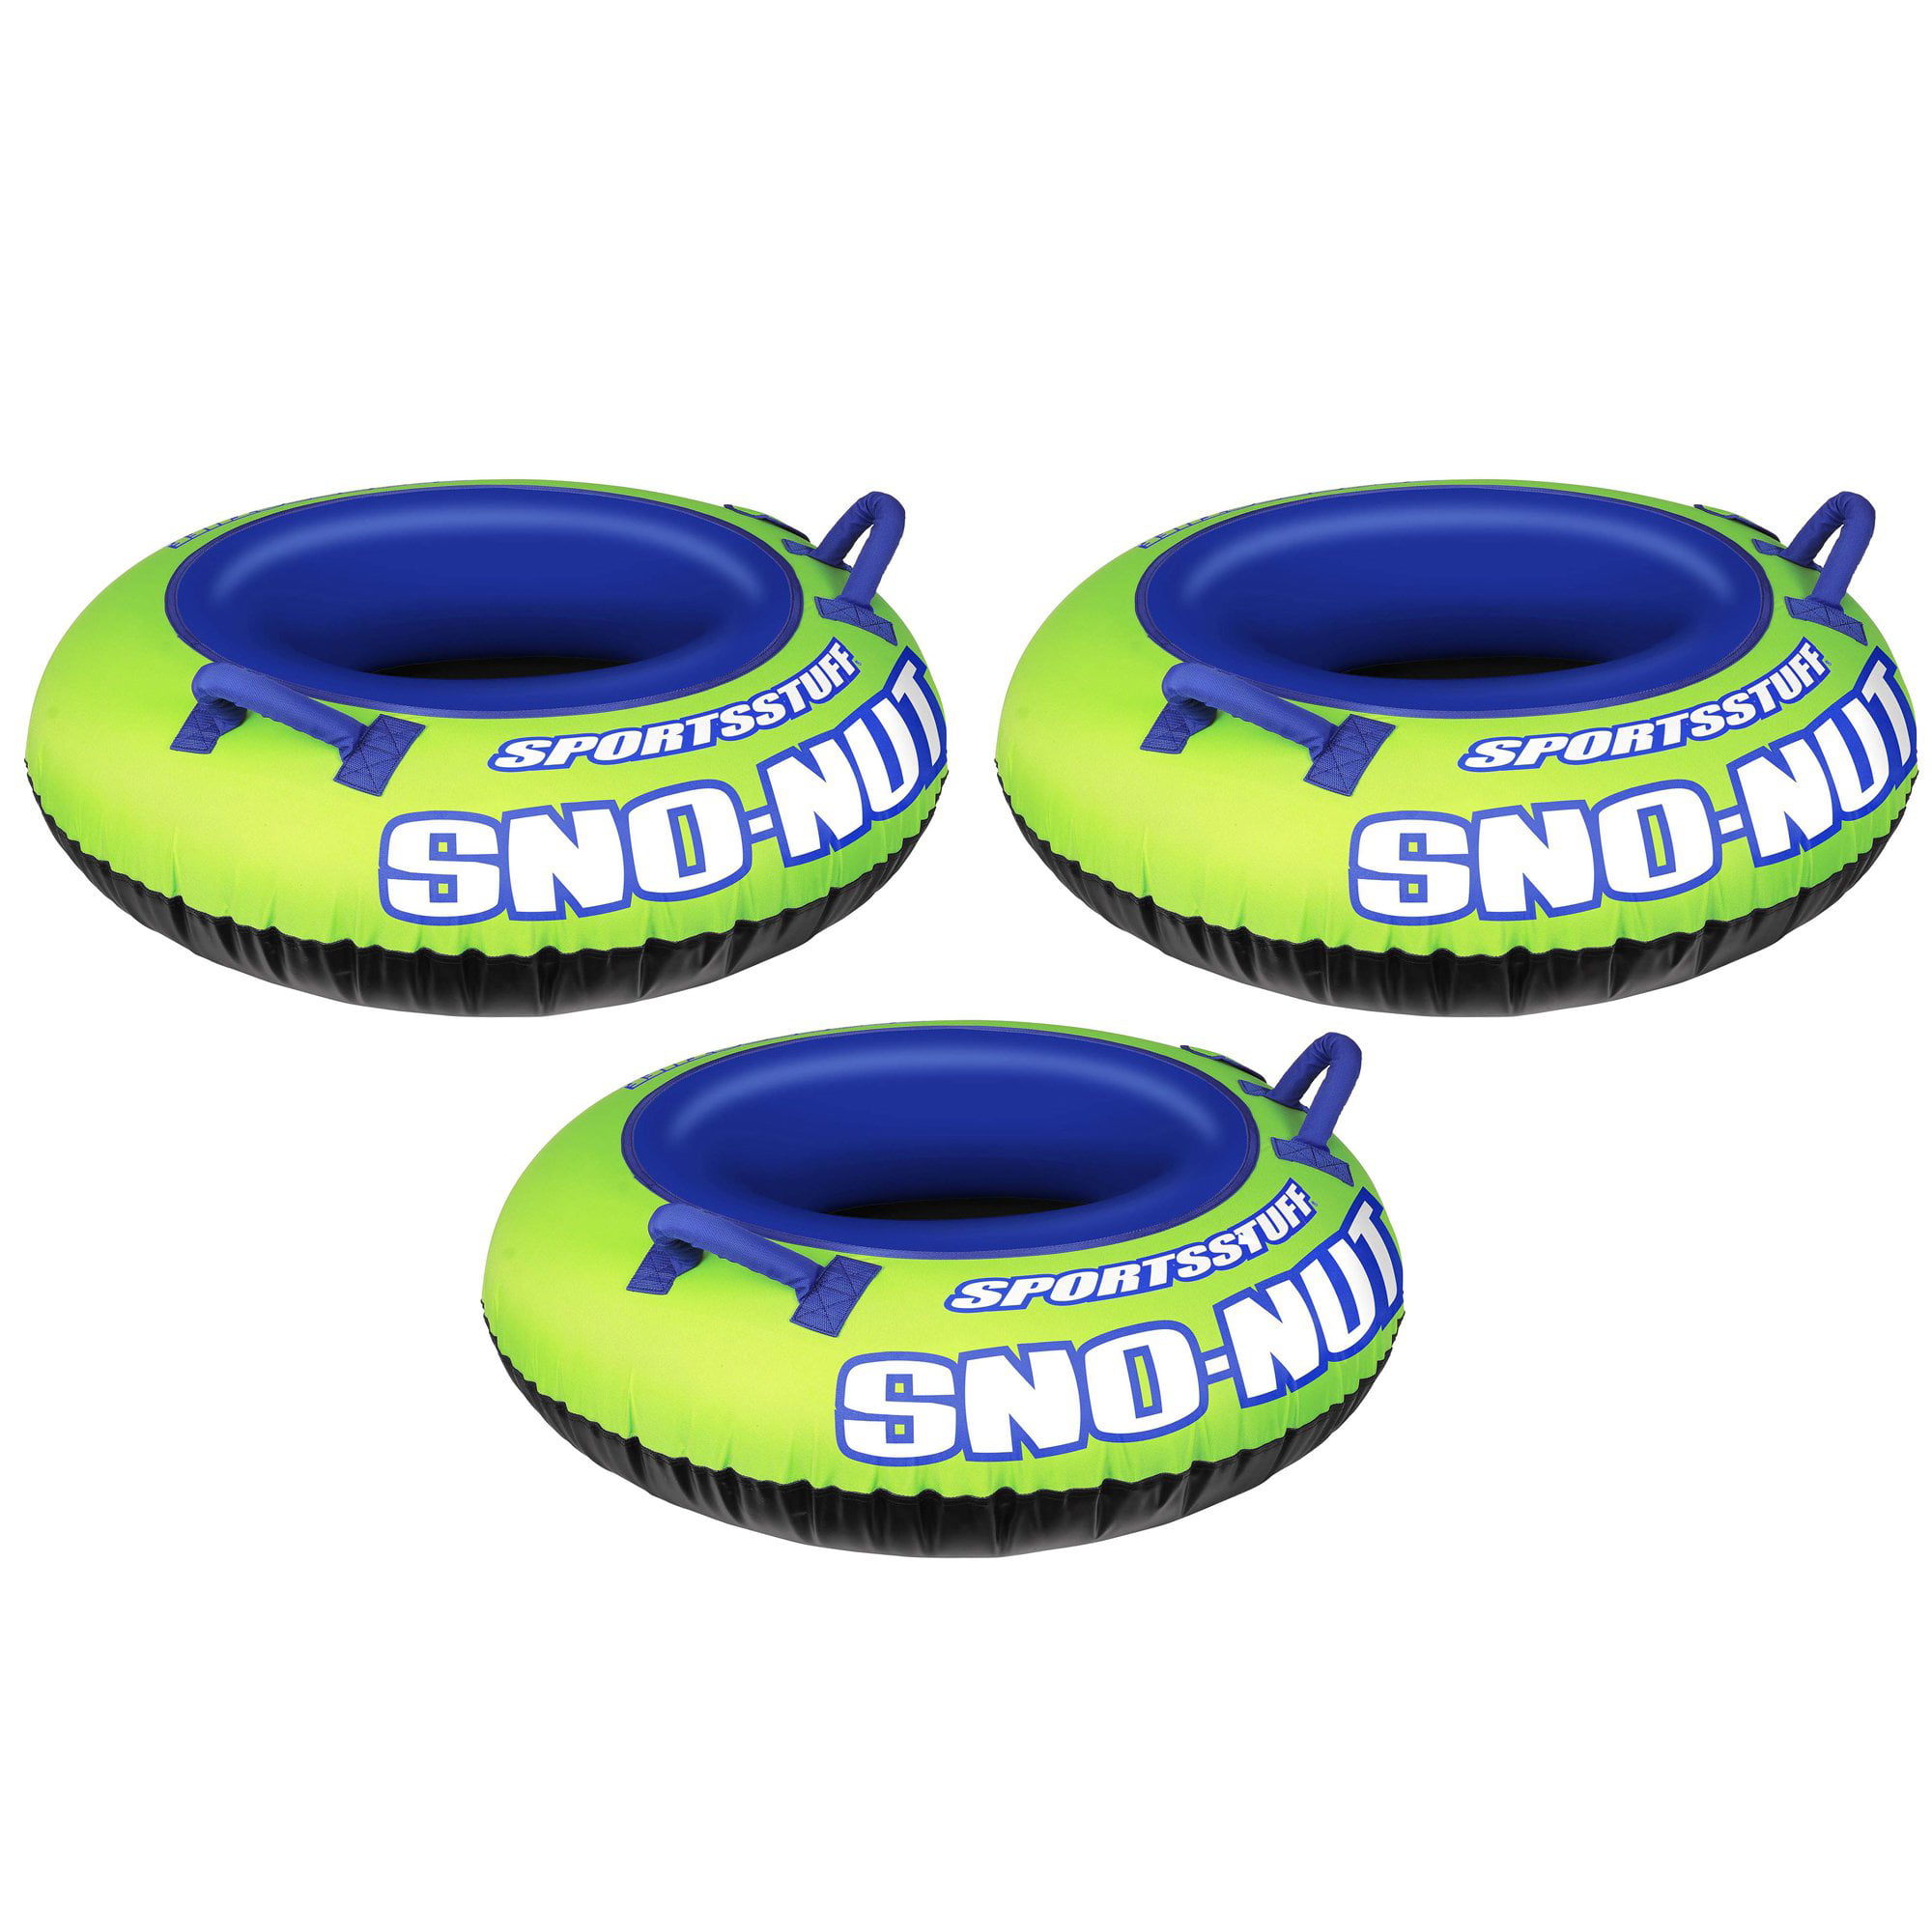 Sportsstuff Classic Plastic Snow Sled 1-2 Rider Options Multiple Pack Sizes Available 